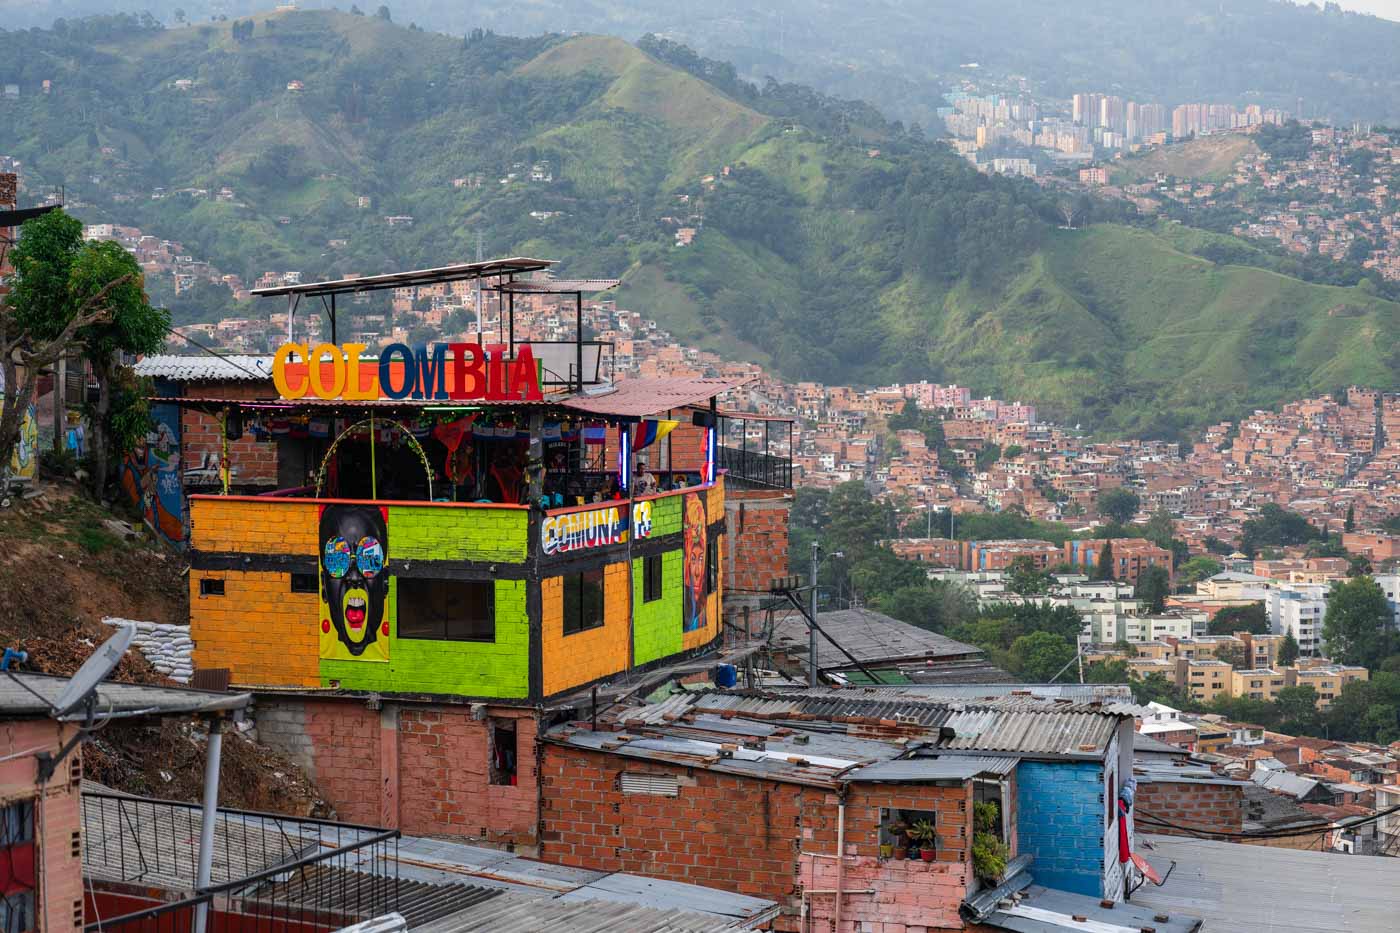 A colourful bar in Comuna 13 overlooking the rest of Medellin city.